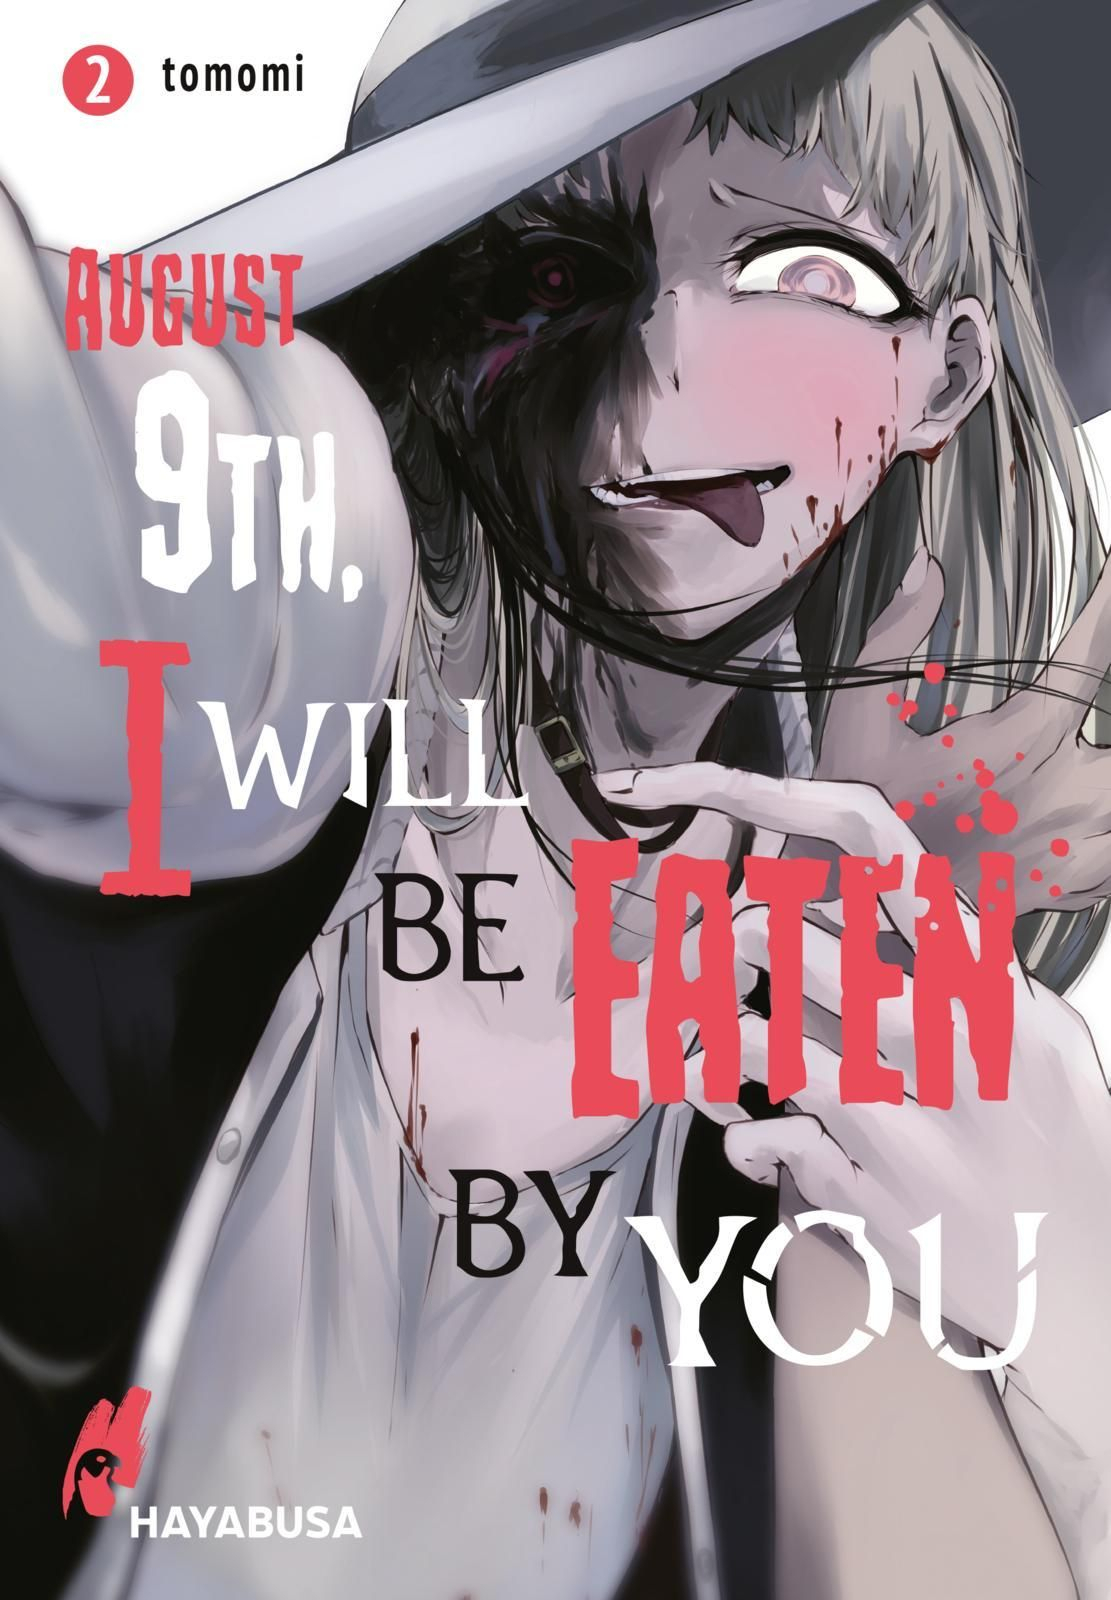 August 9th, I will be eat 02 Manga (New)